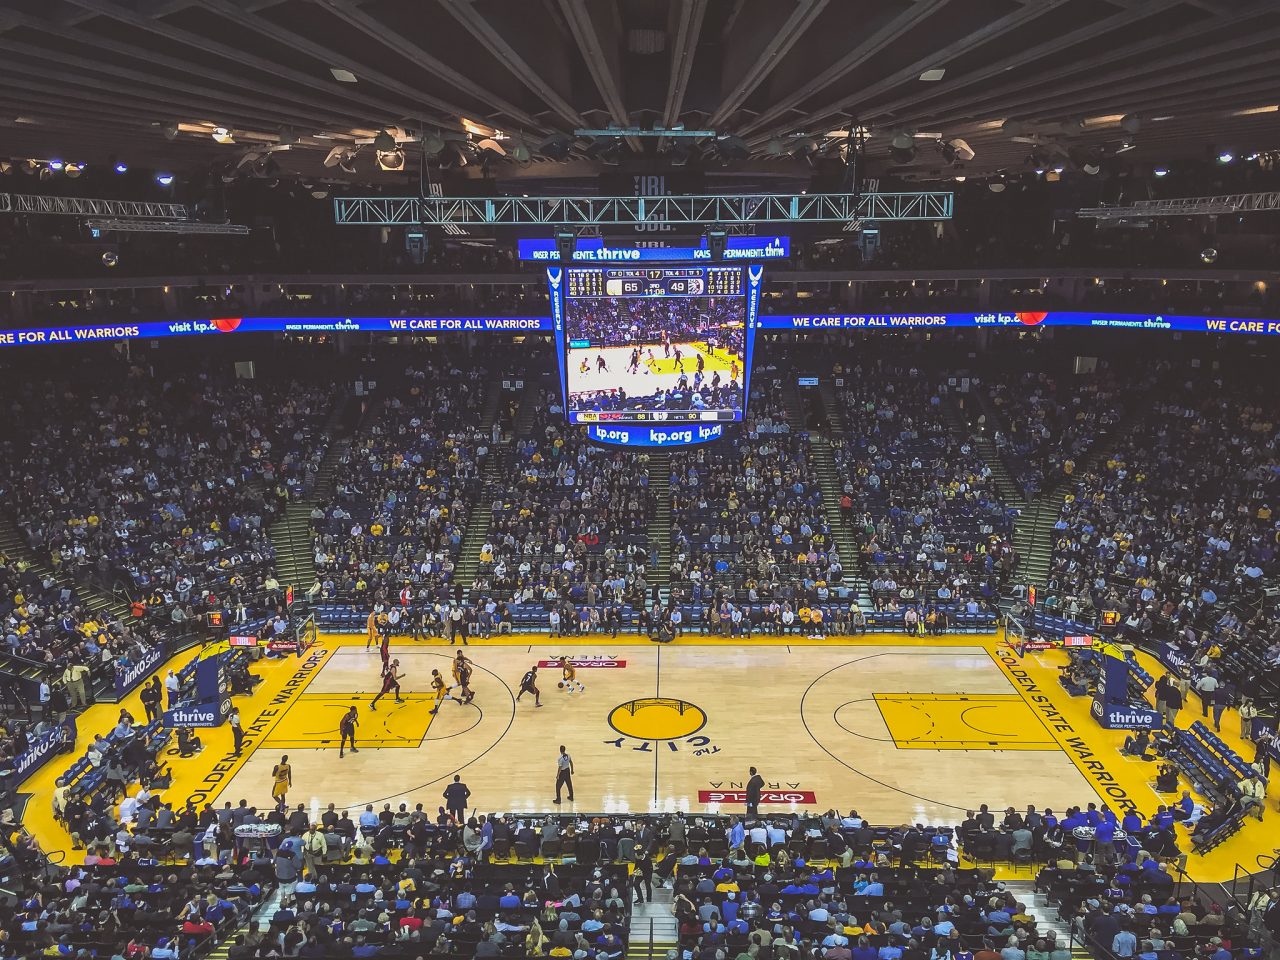 nba team golden state warriors playing against the toronto raptors